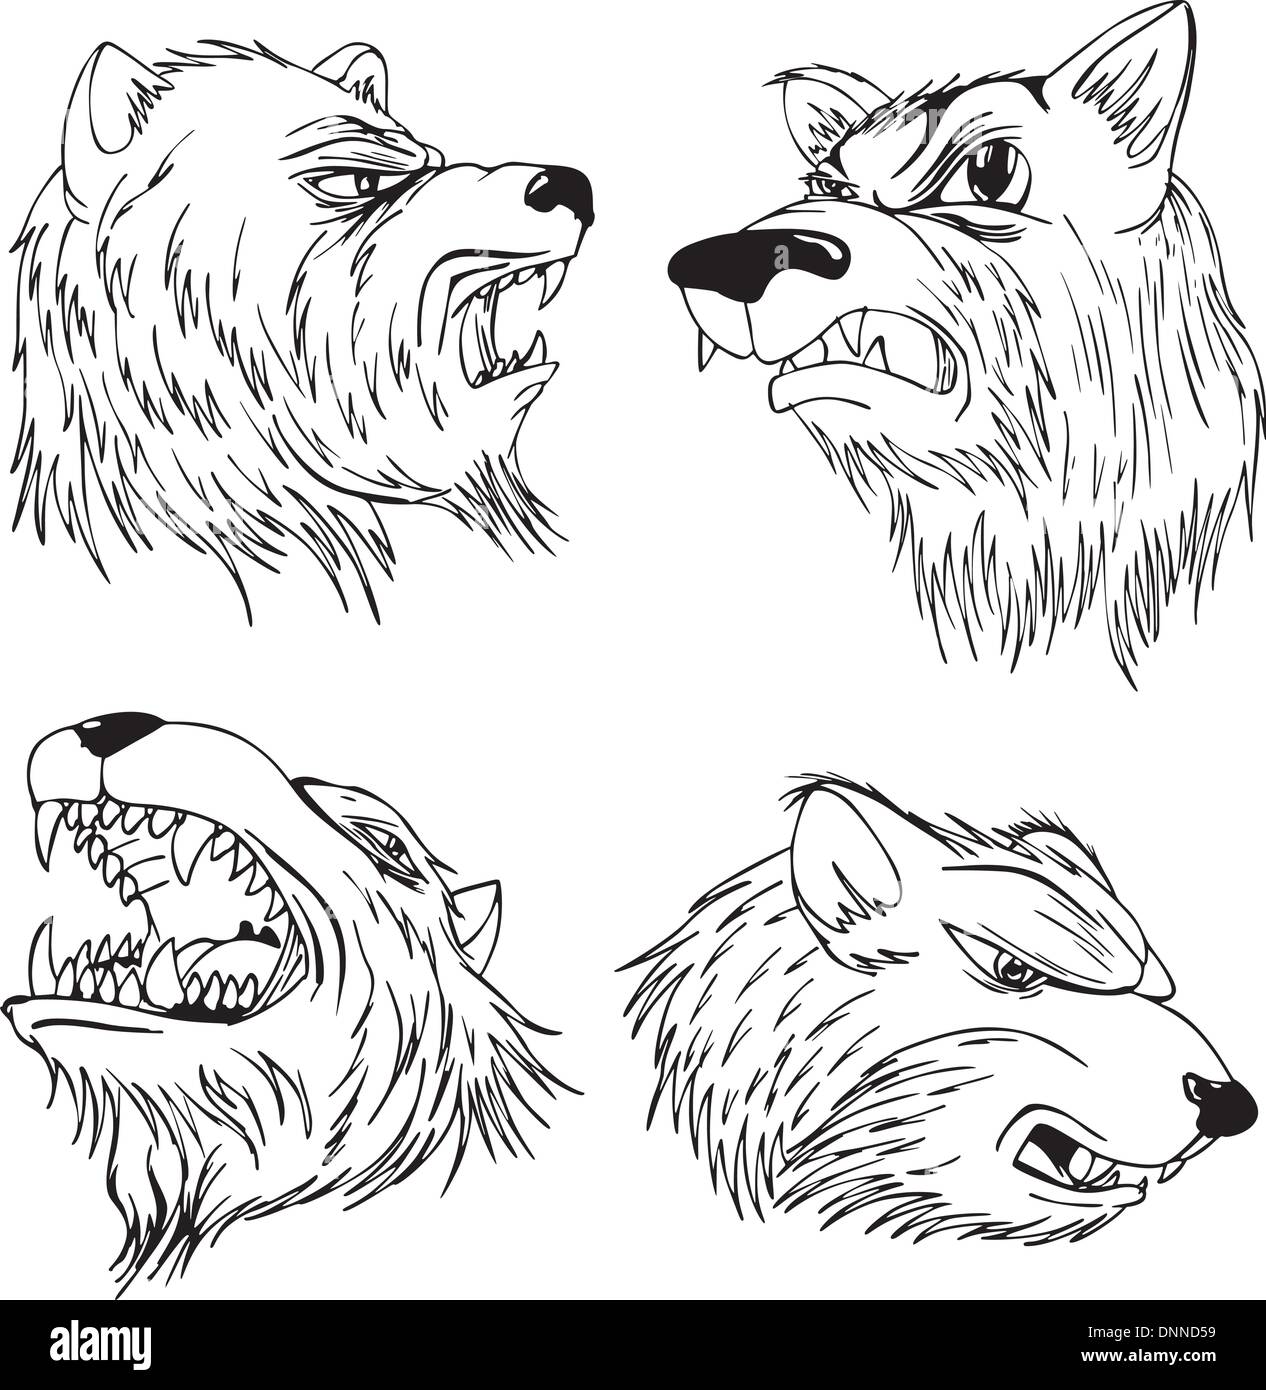 Aggressive bear heads. Set of black and white vector tattoo designs. Stock Vector